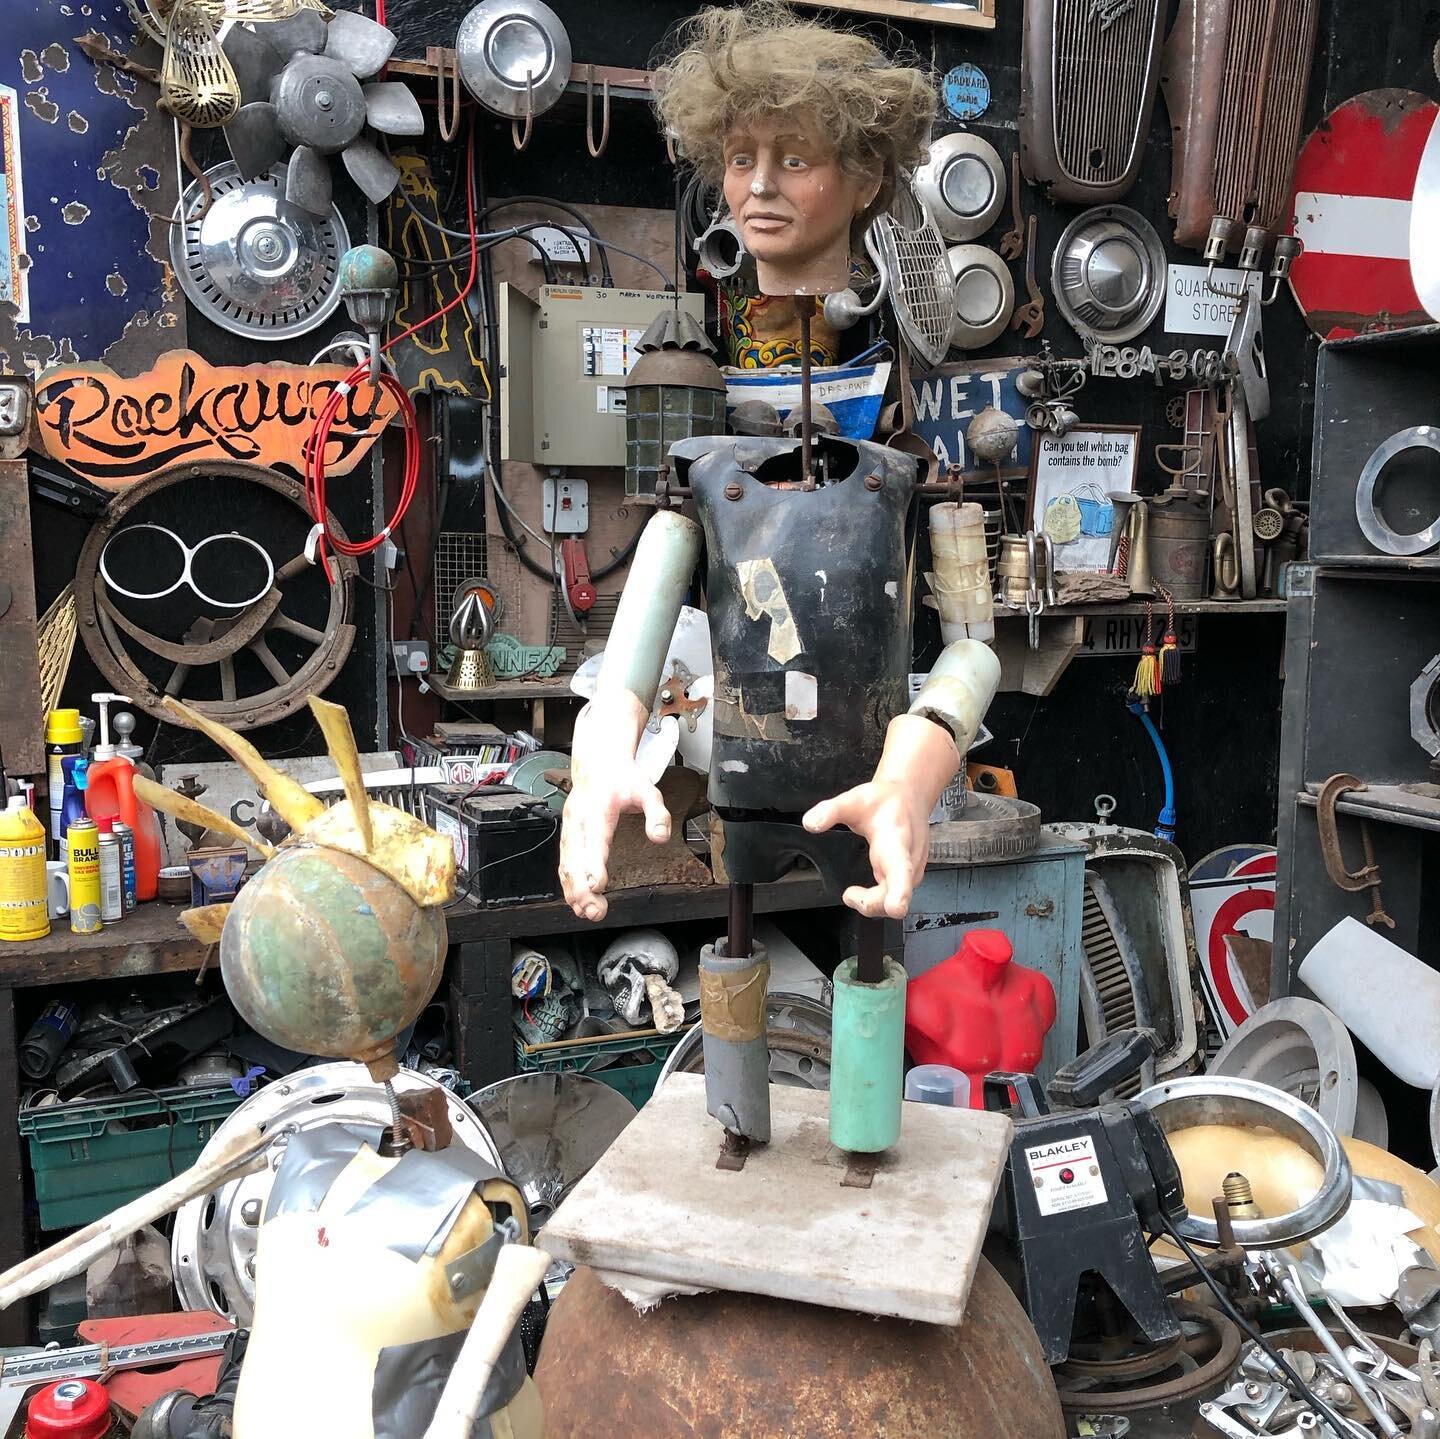 Rockaway Park in a quarry in Somerset where talented artists and creatives make and teach and share ideas to produce amazing things in the spirit of collaboration and collectivism. Weird and wonderful objects all around, workshops and stalls and vega